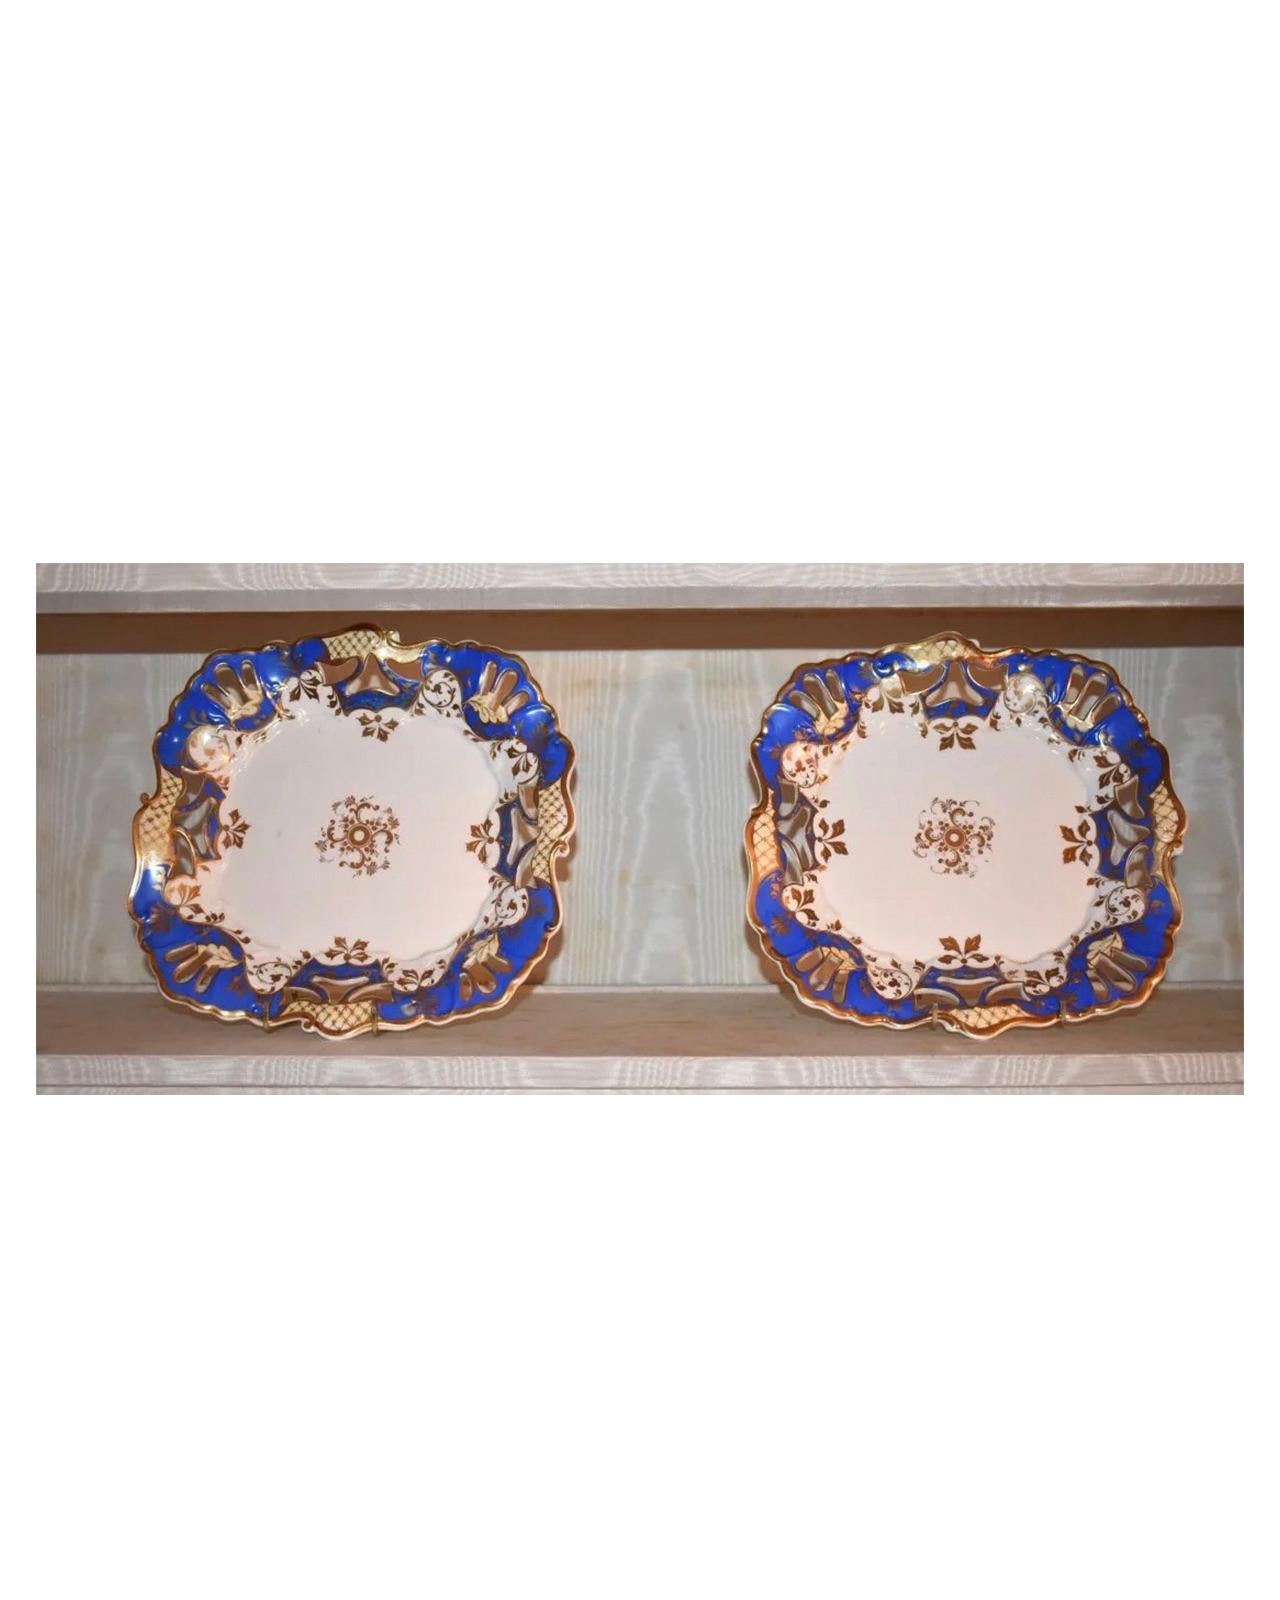 Of fine quality, the service with blue decorated borders with gilt floral decoration.  Consisting of 9 luncheon plates 9 1/4